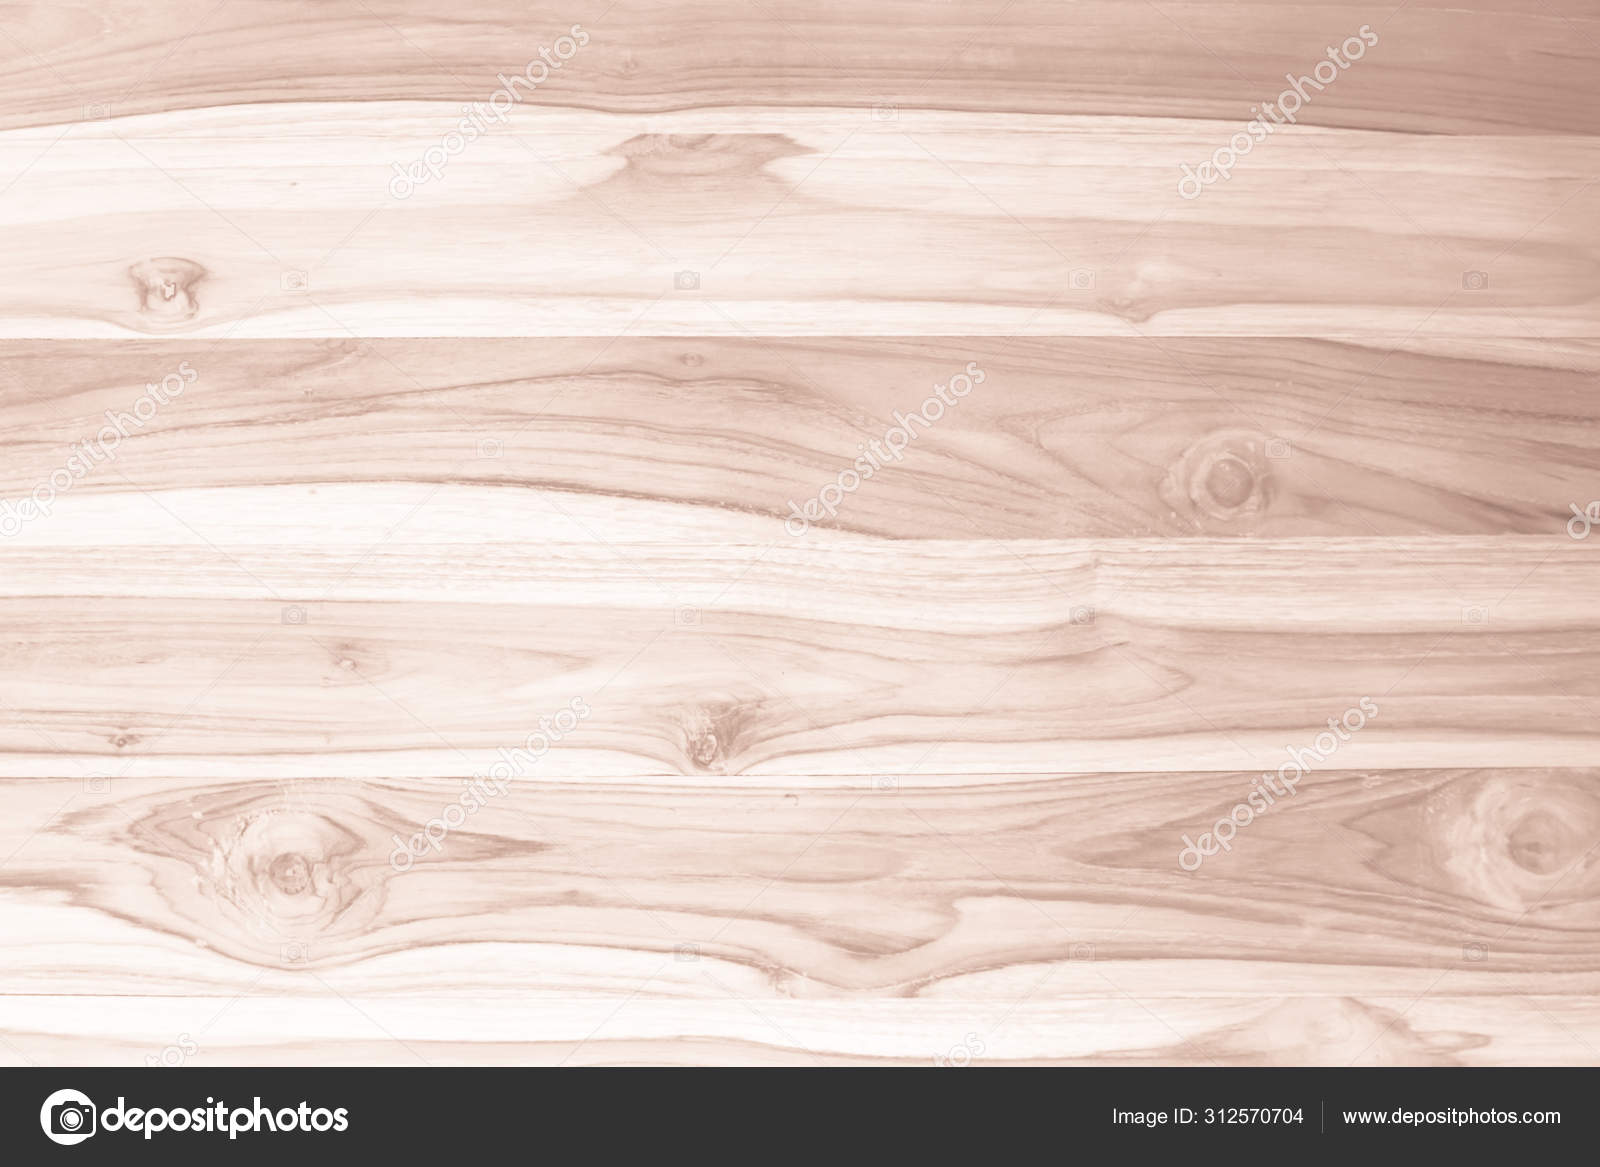 Natural Rustic teak wood wall surface background for vintage